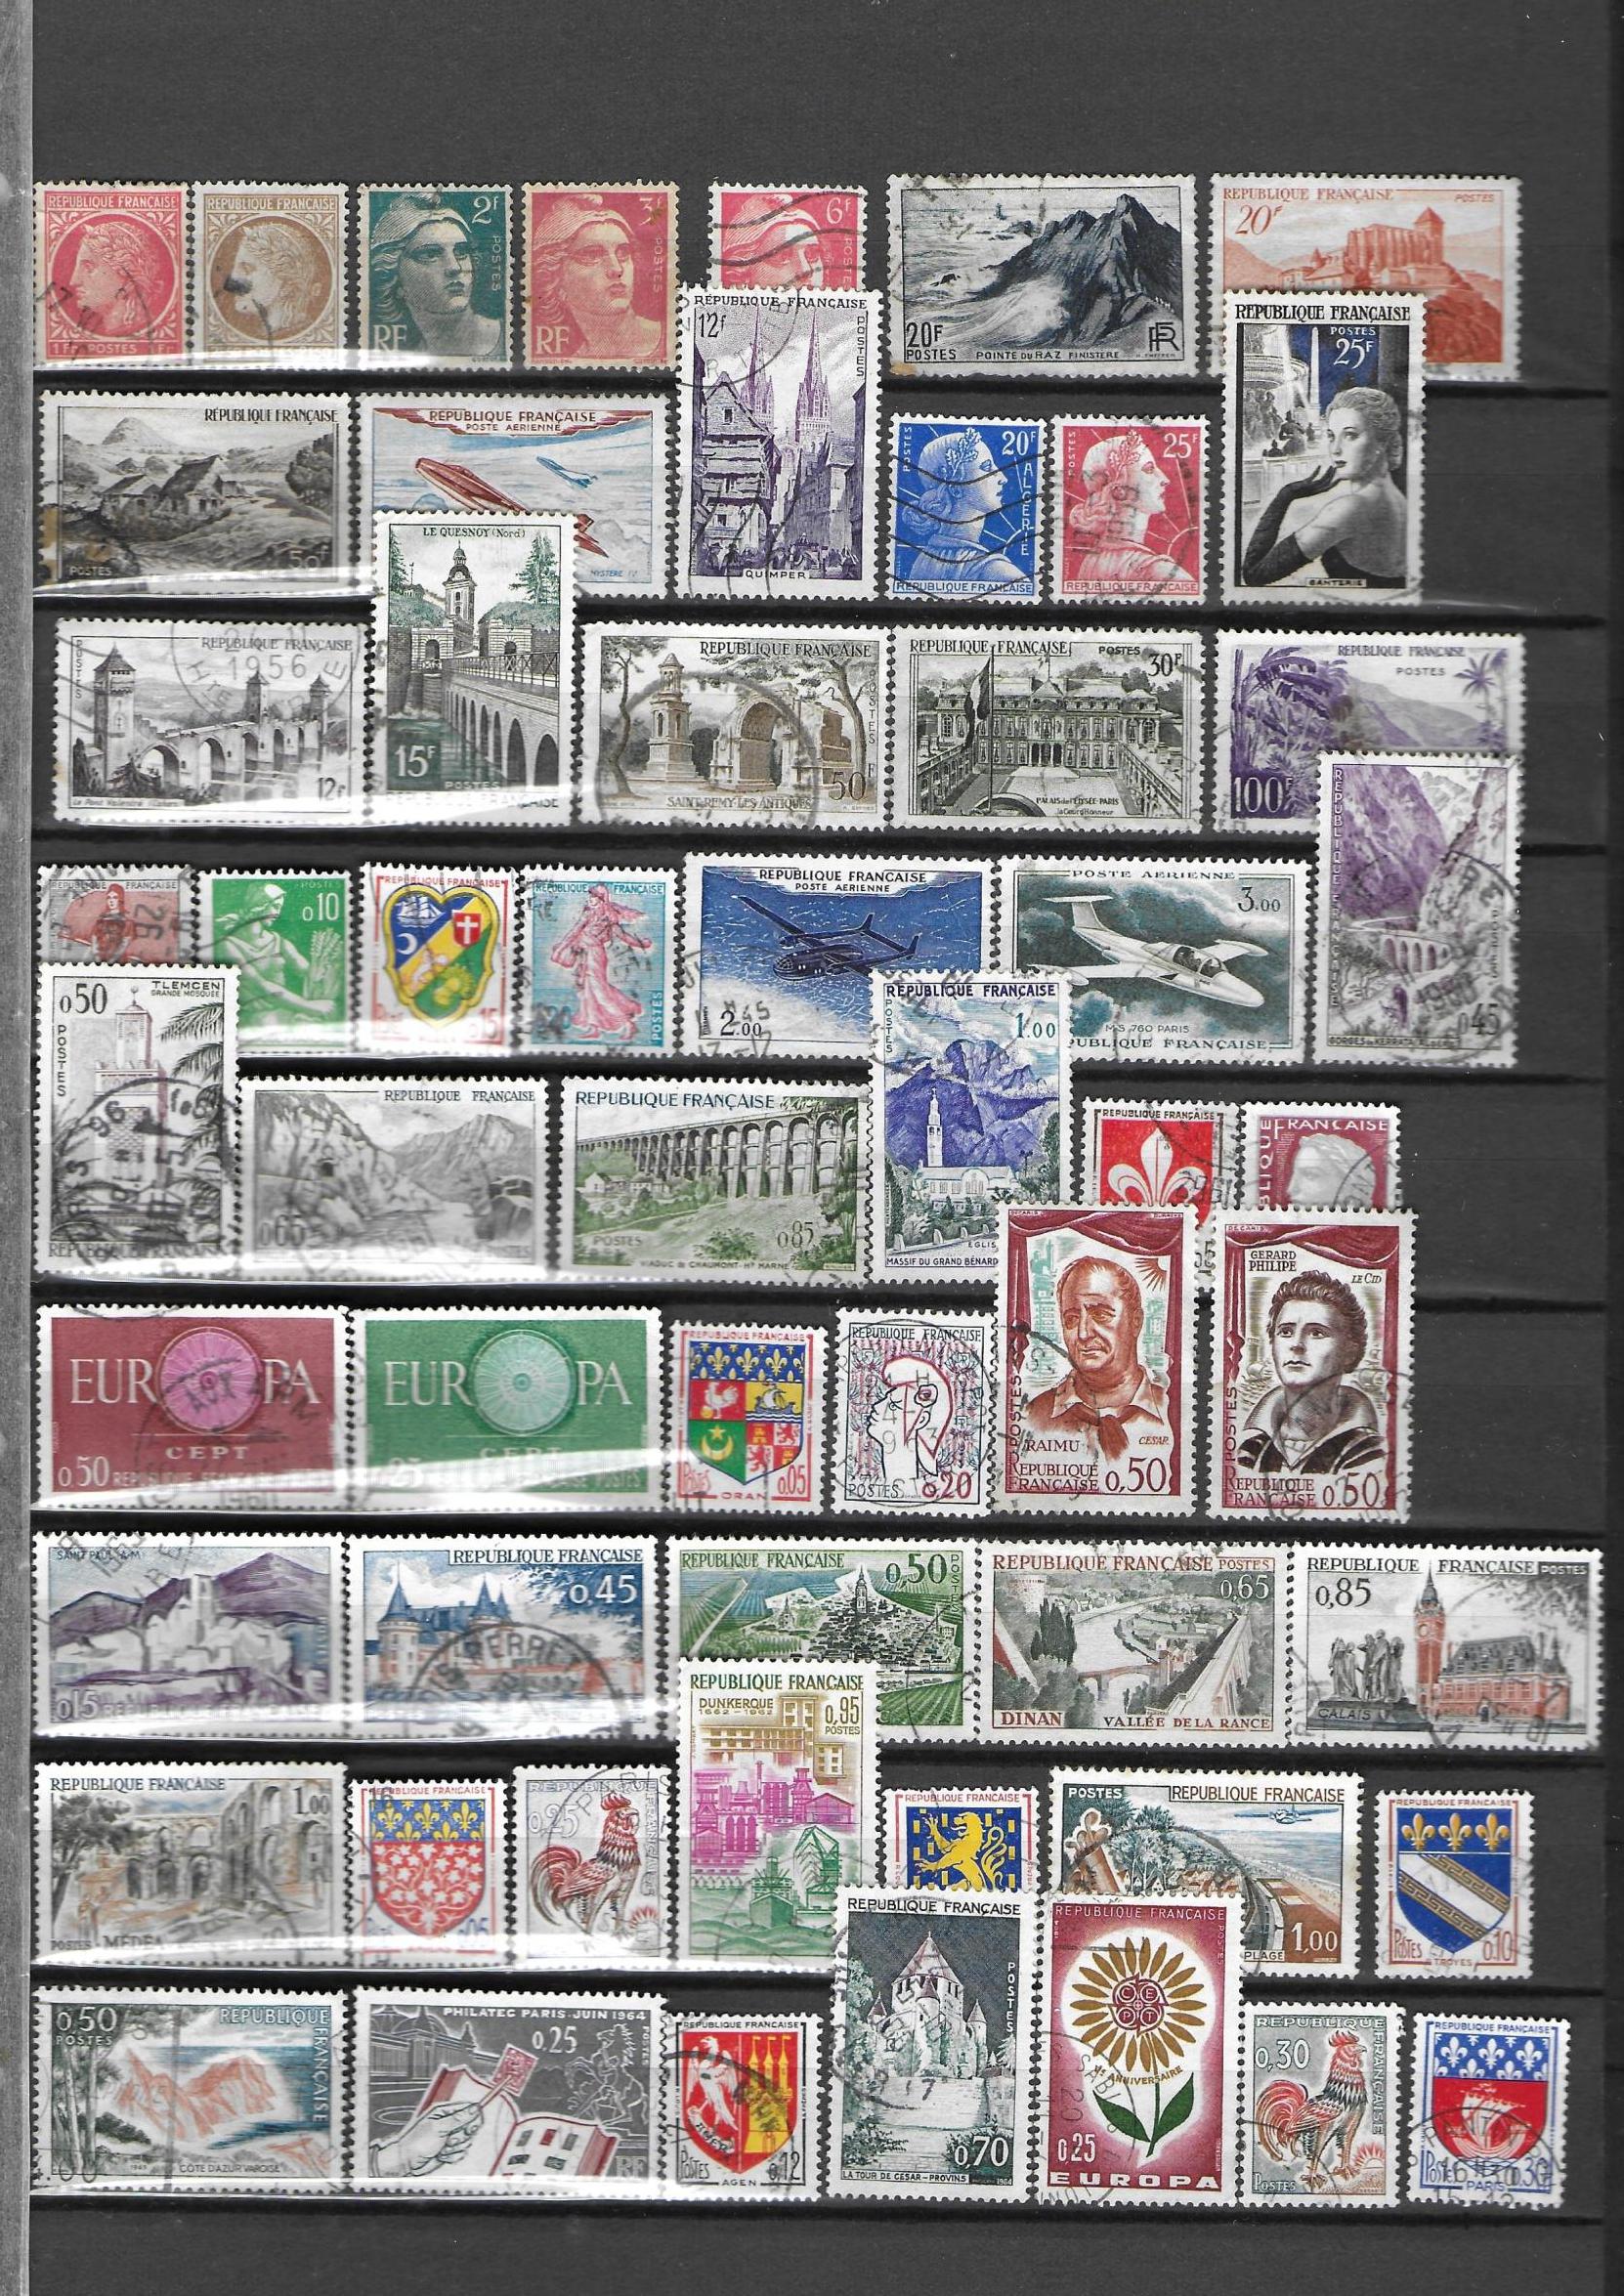 Timbres France 1 - Copie.jpg